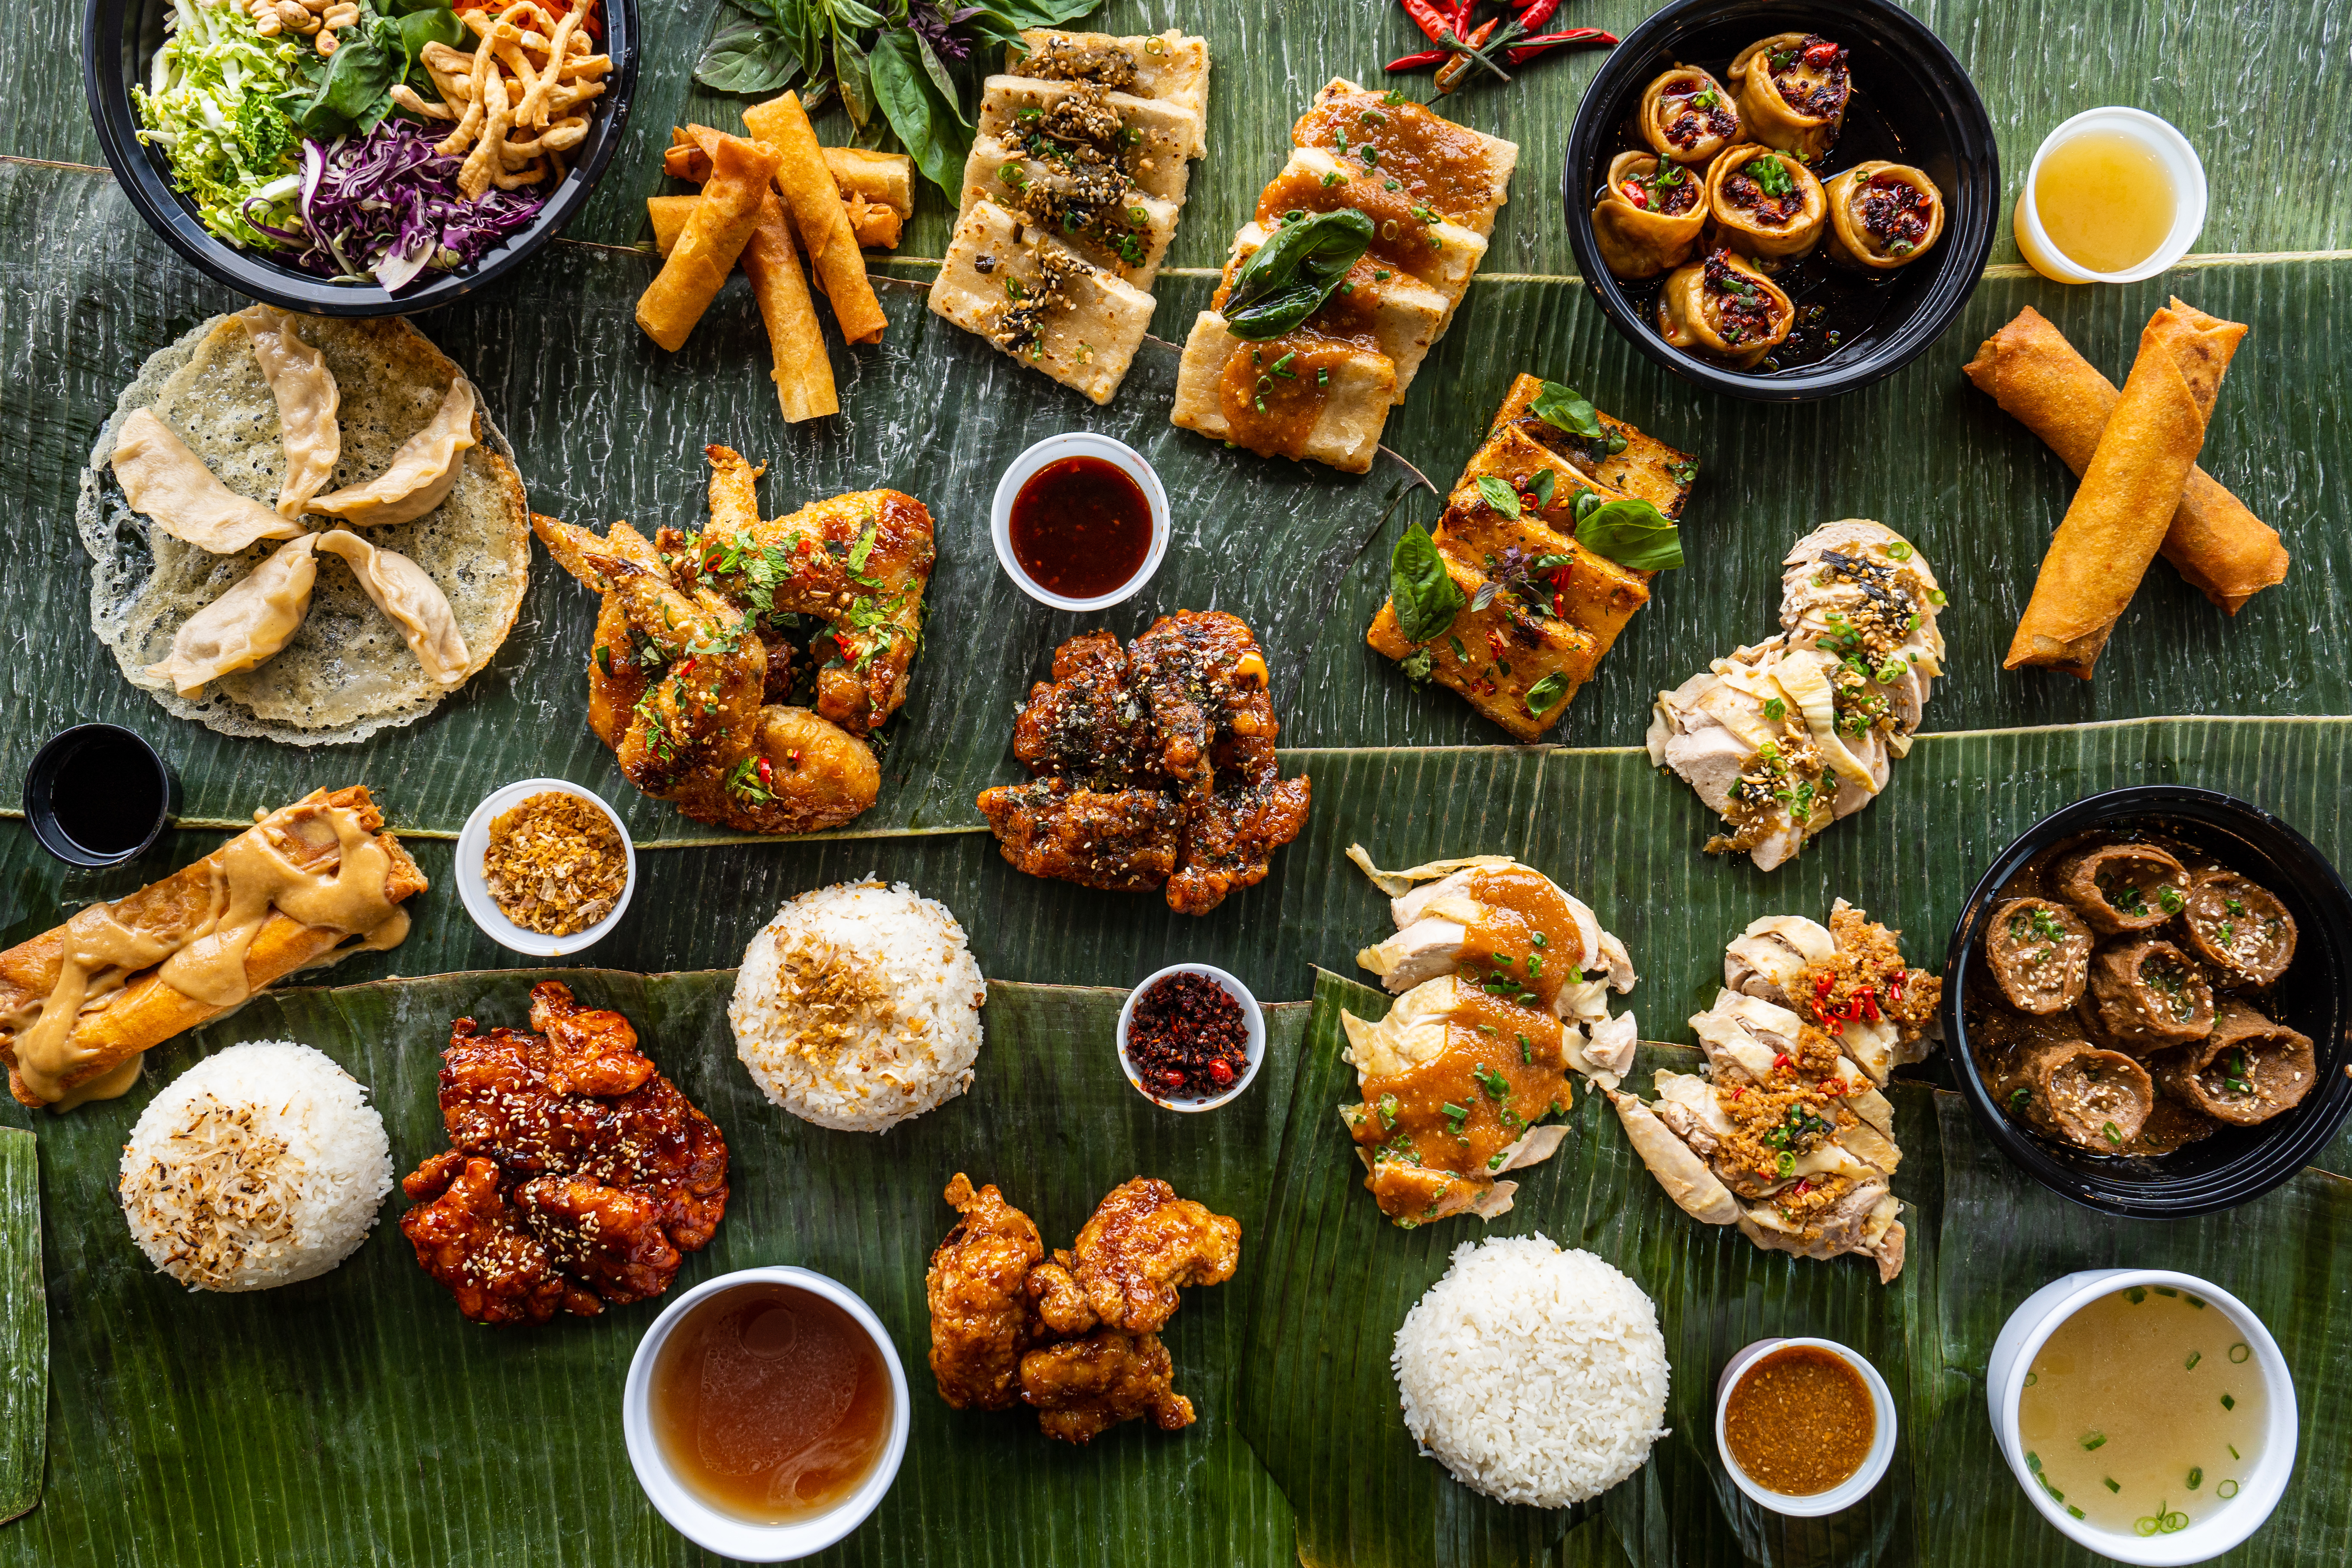 An assortment of food on banana leaves.